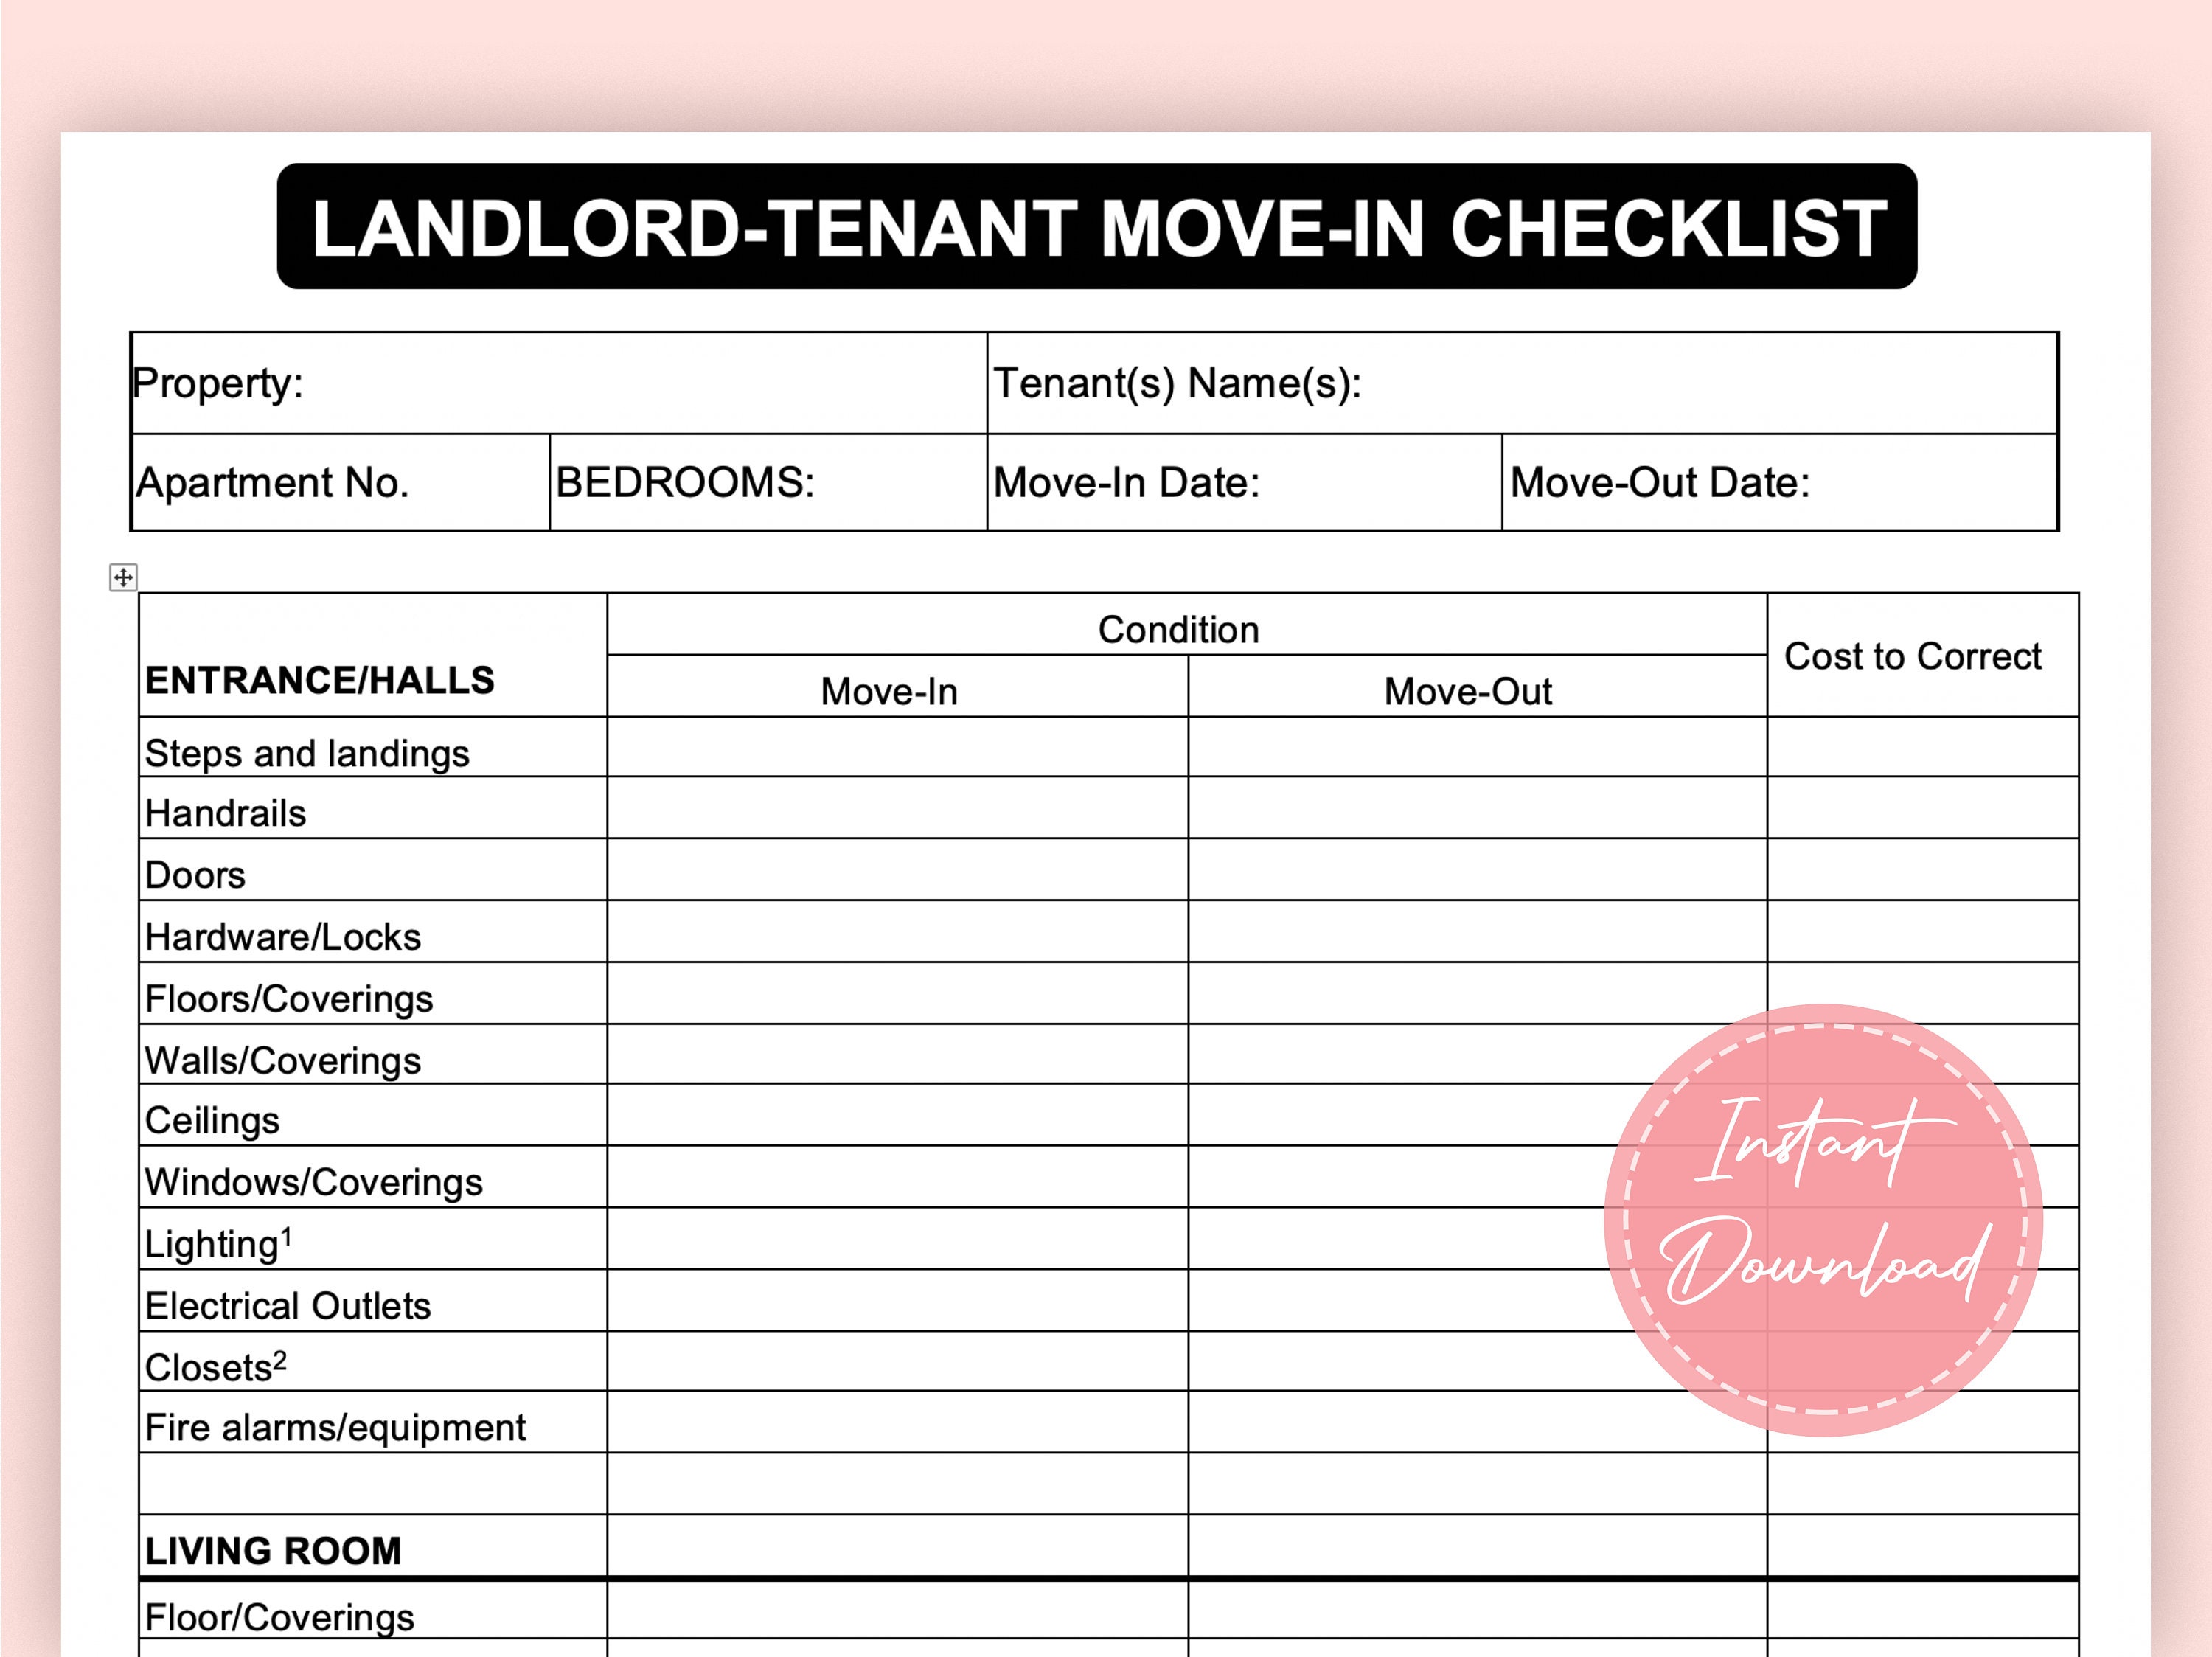 Landlord Tenant Checklist Move In Move Out Checklist Landlord Tenant